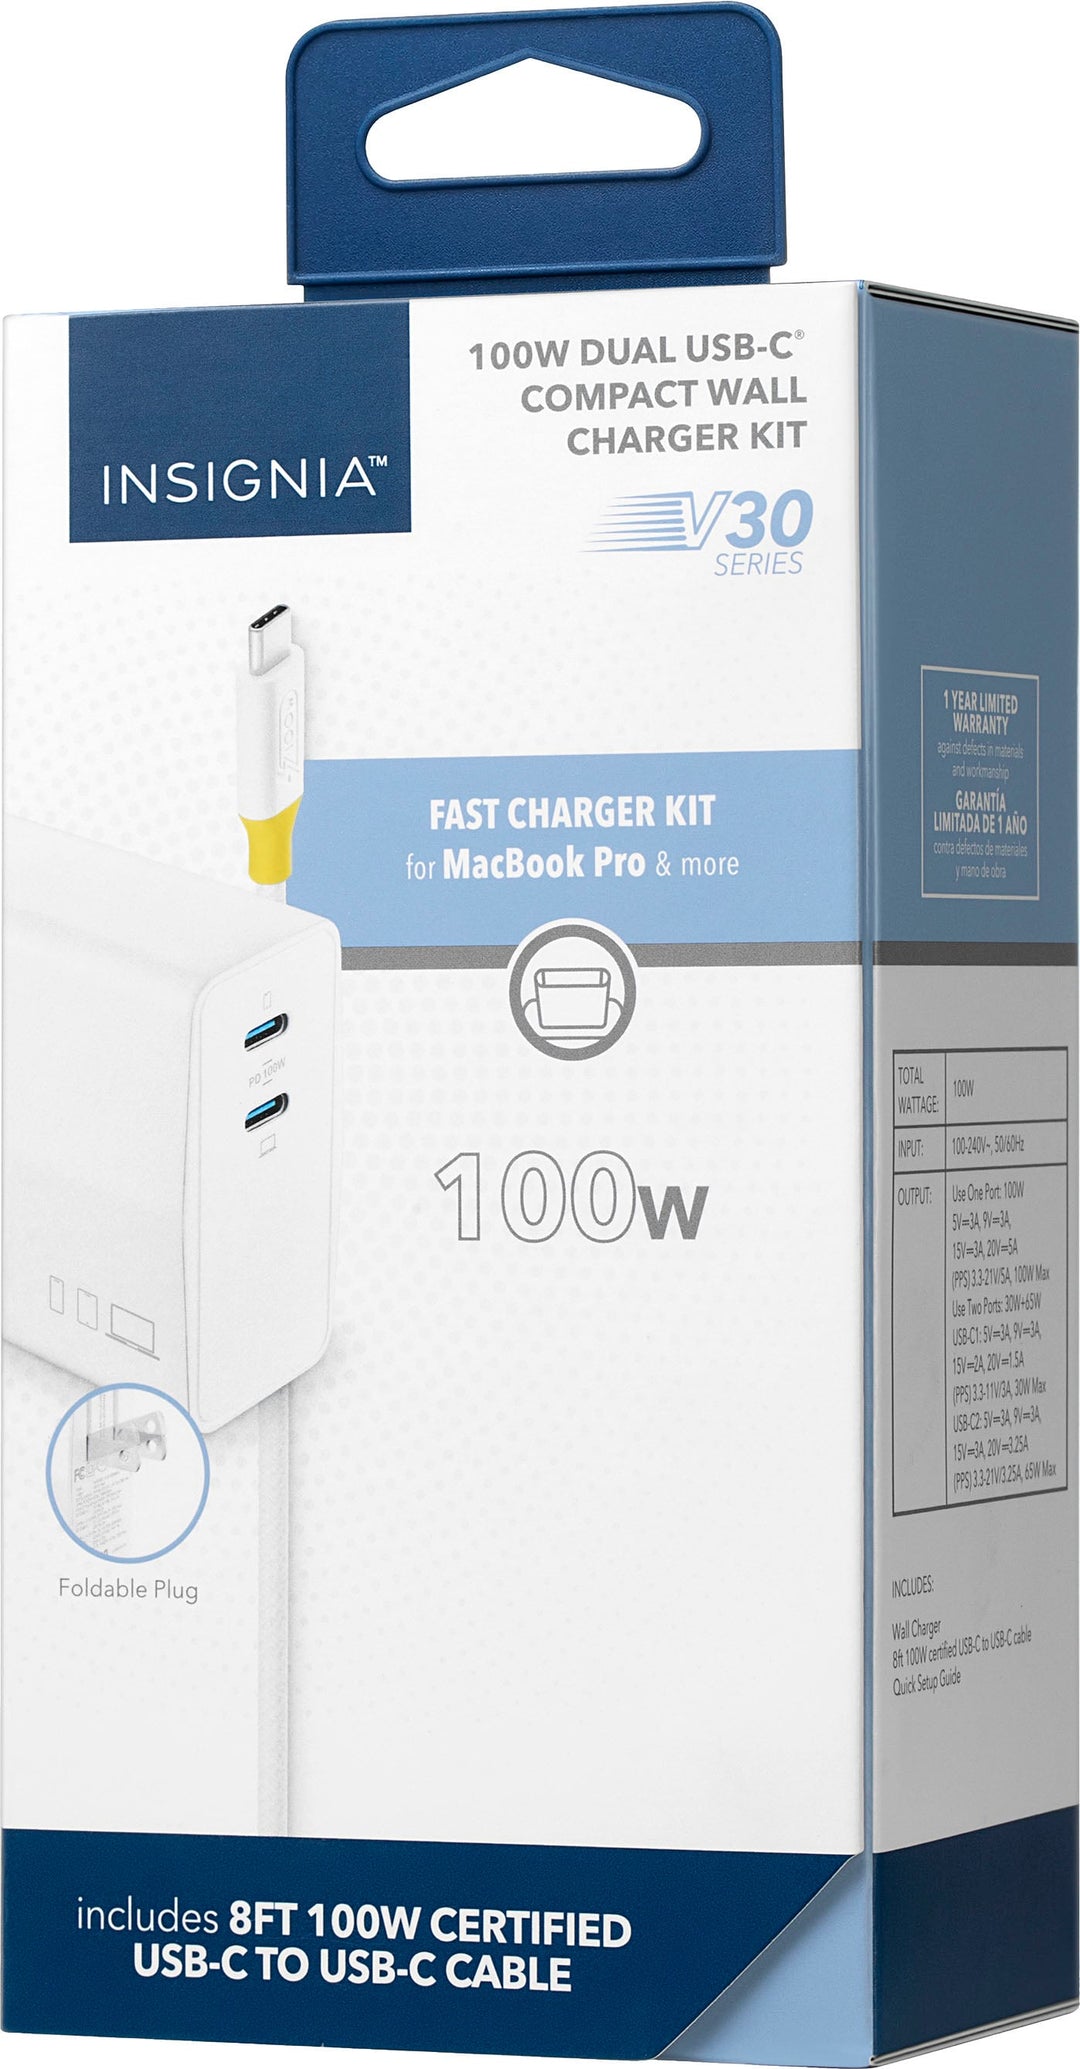 Insignia™ - 100W Dual Port USB-C Compact Wall Charger Kit for MacBook Pro & Other Devices - White_8